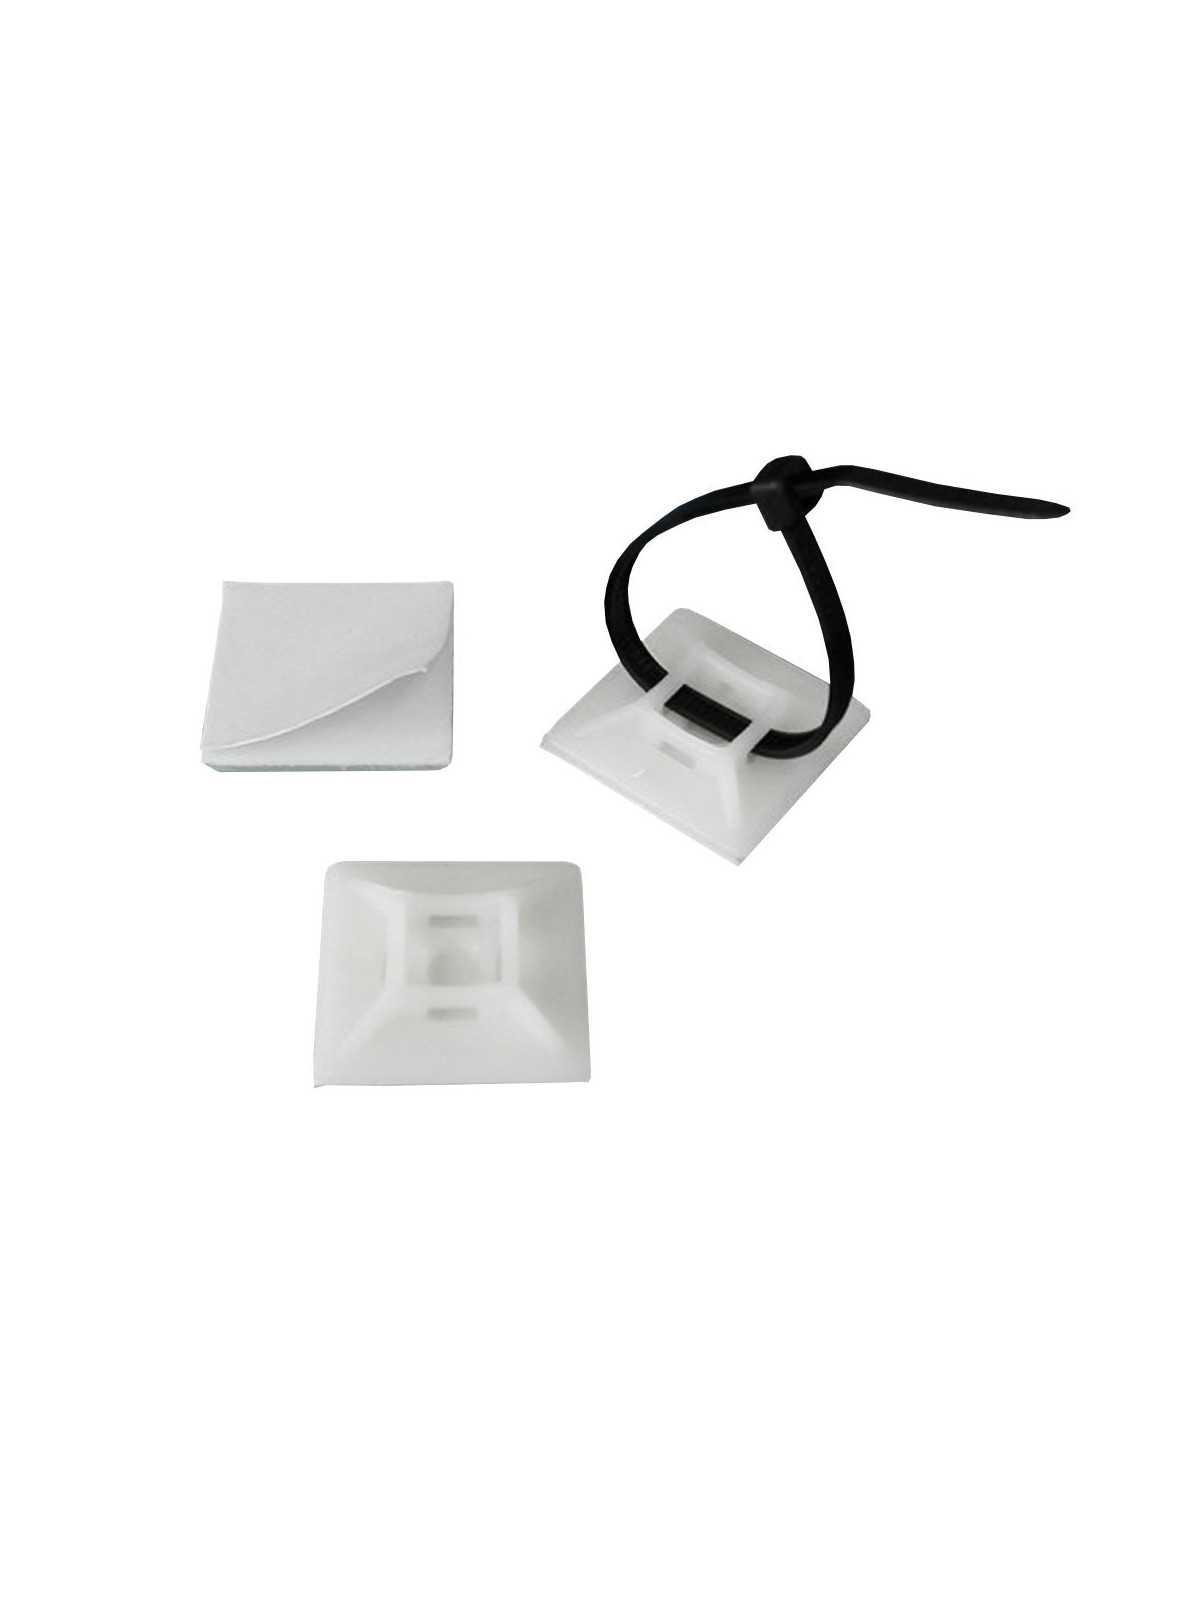 https://www.wattuneed.com/8569-product_zoom/self-adhesive-cable-clips.jpg